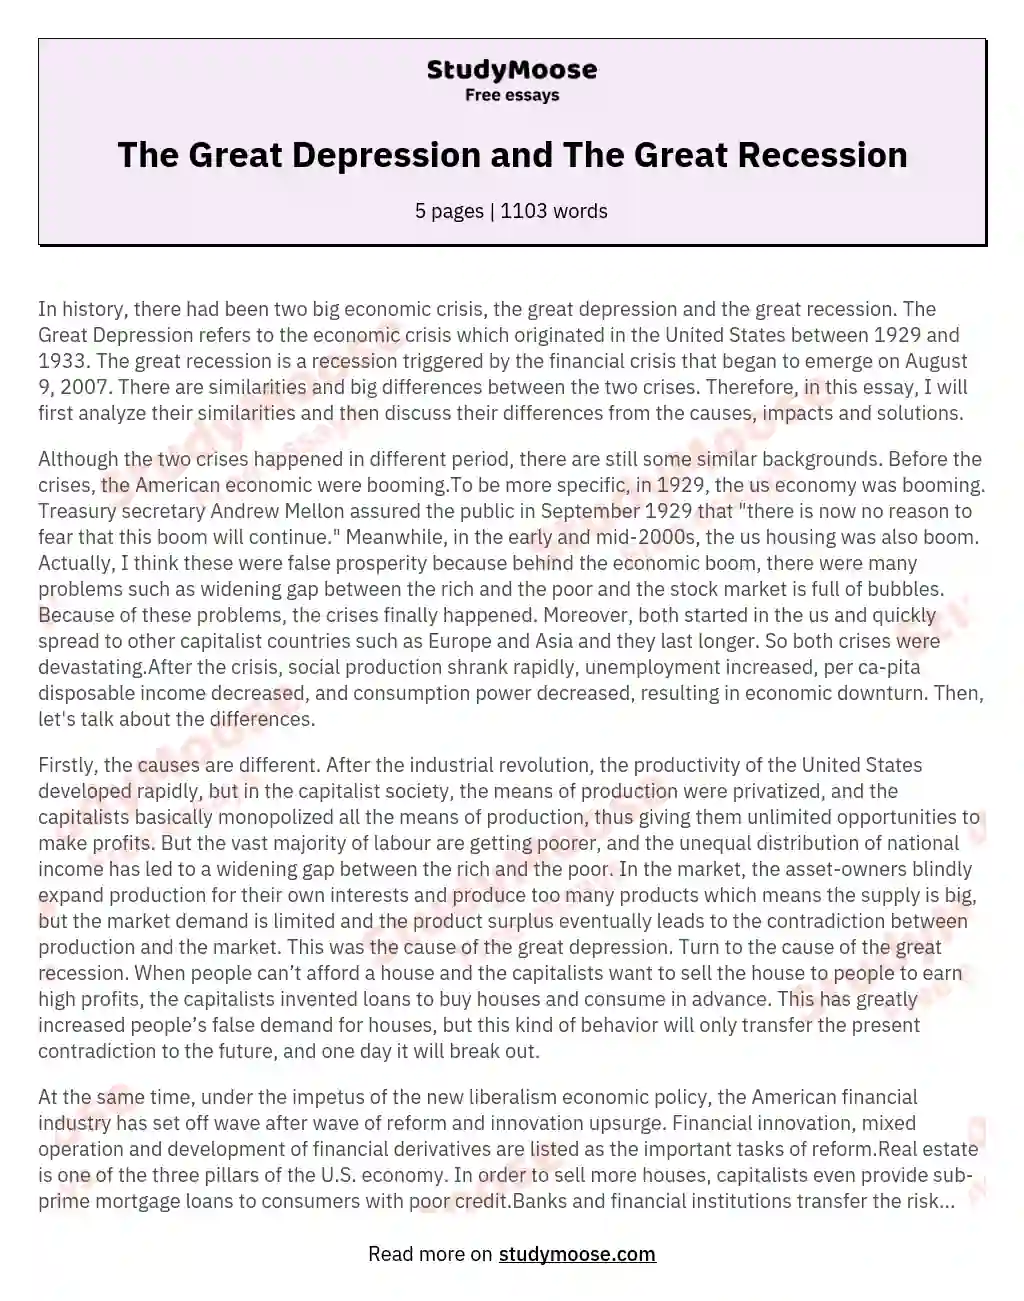 essay titles about great depression